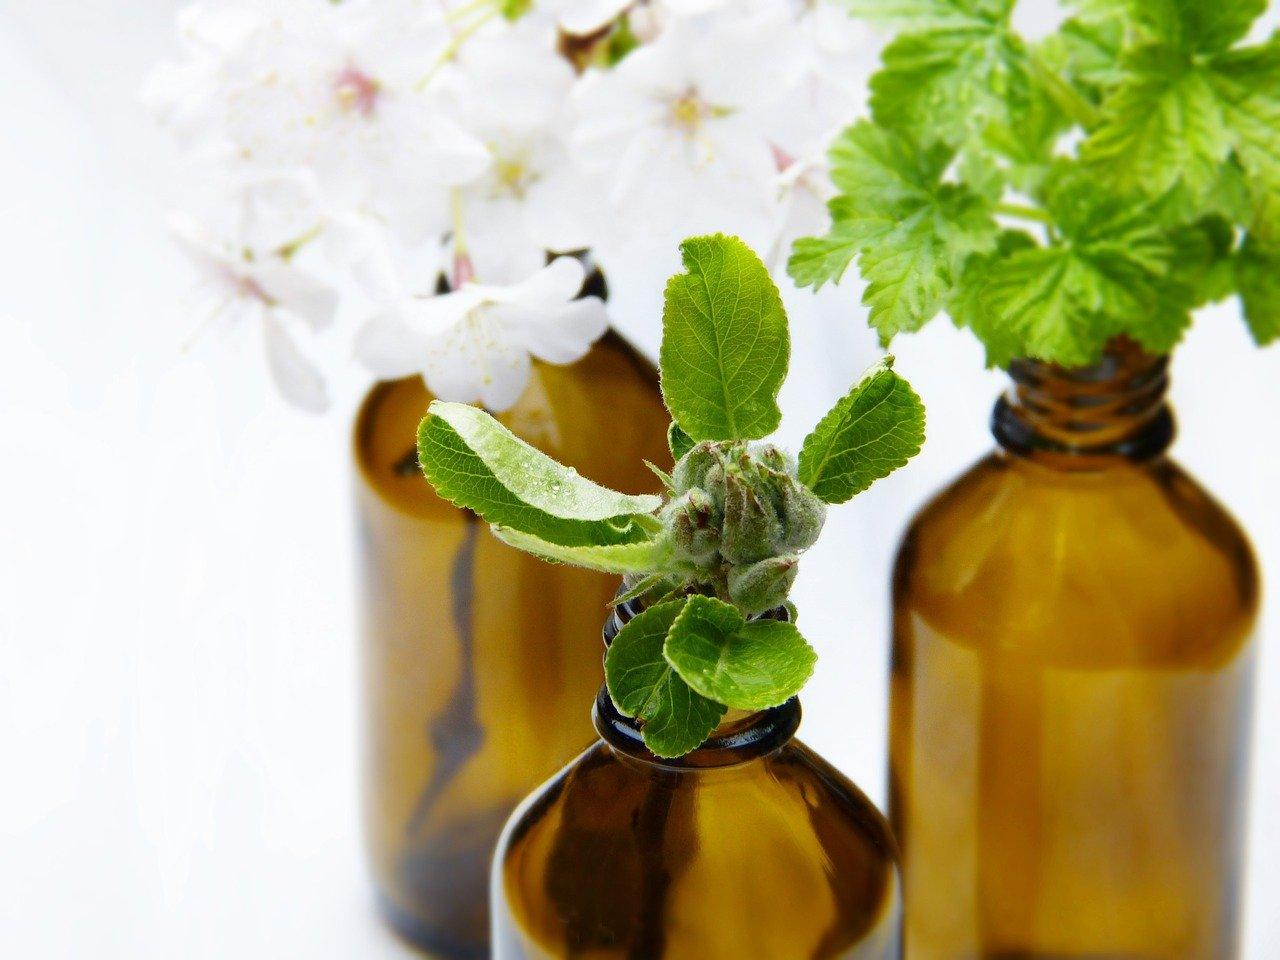 Essential Zen focuses on Homeopathy, which is a medical system based on the belief that the body can cure itself.